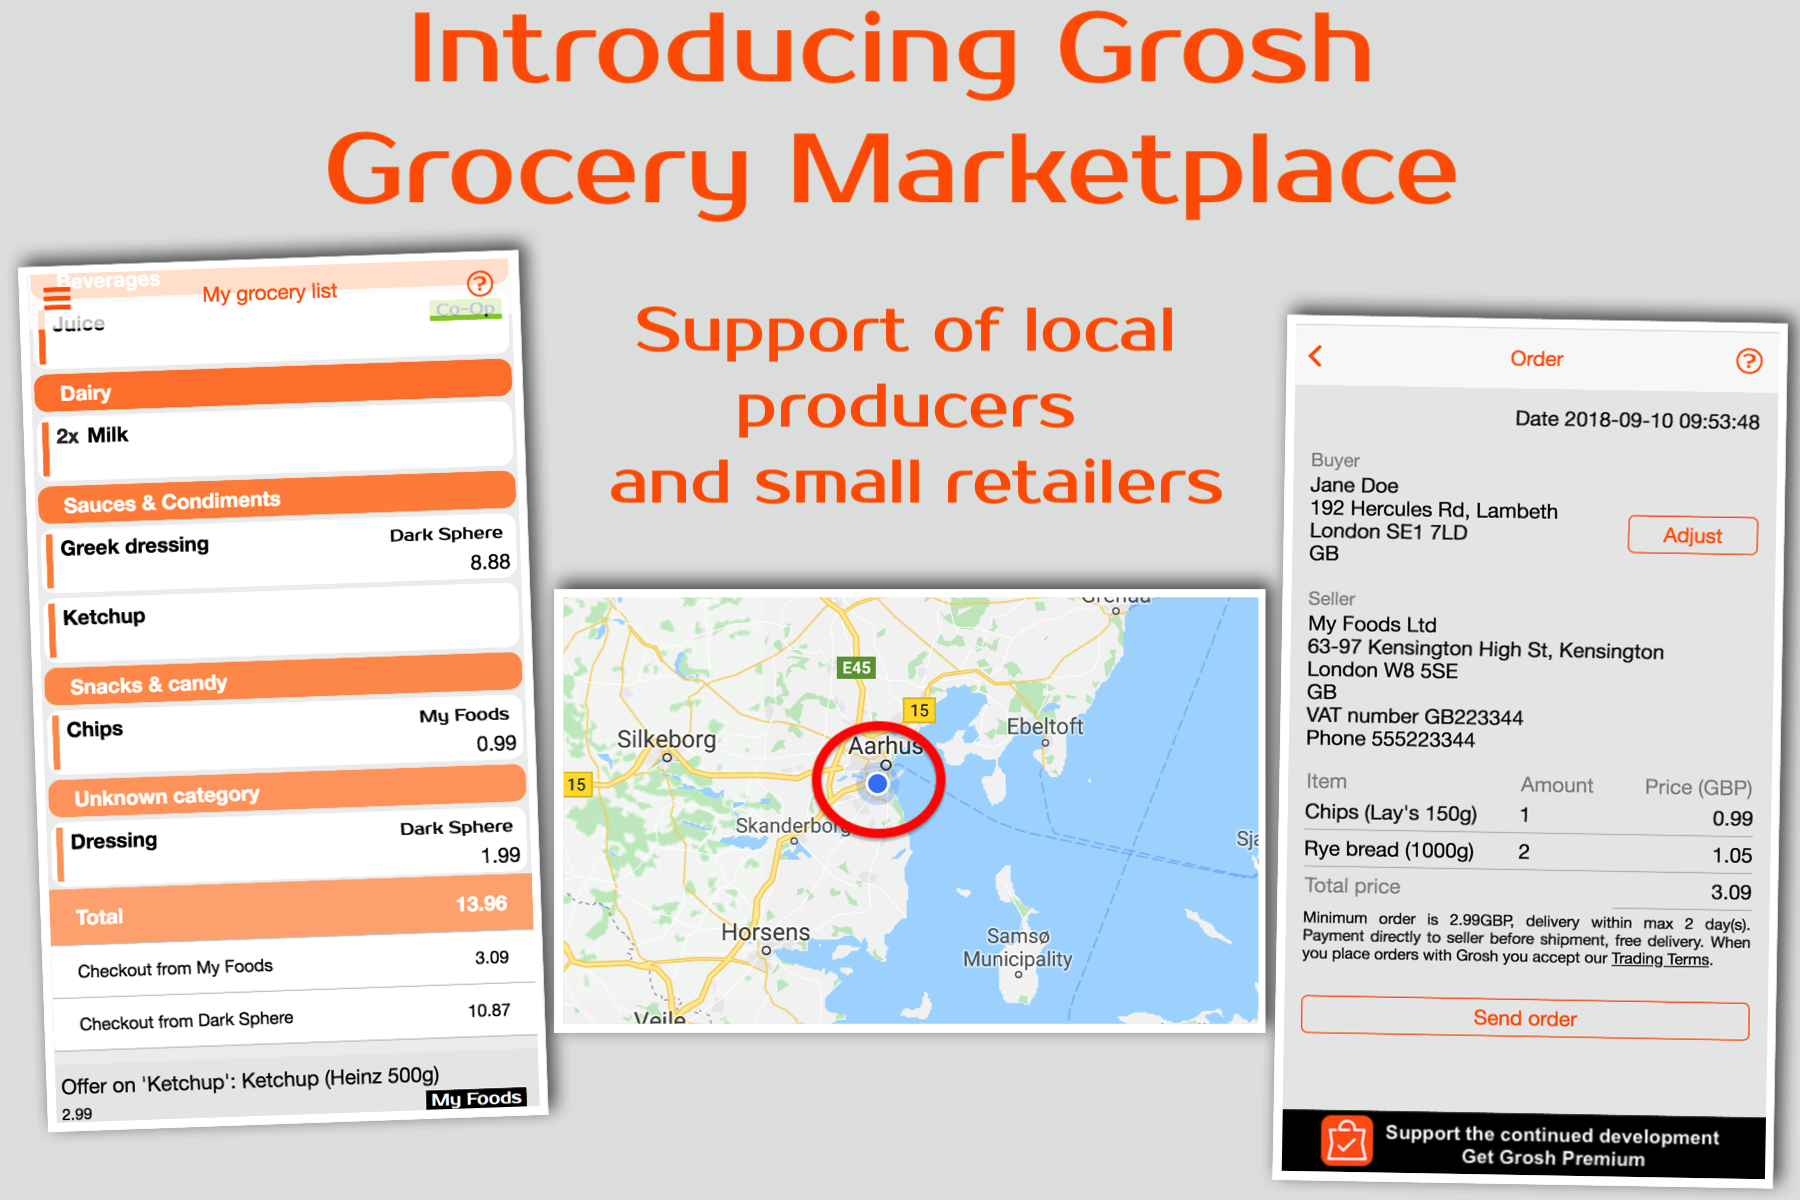 Grosh gets better Grocery Prices